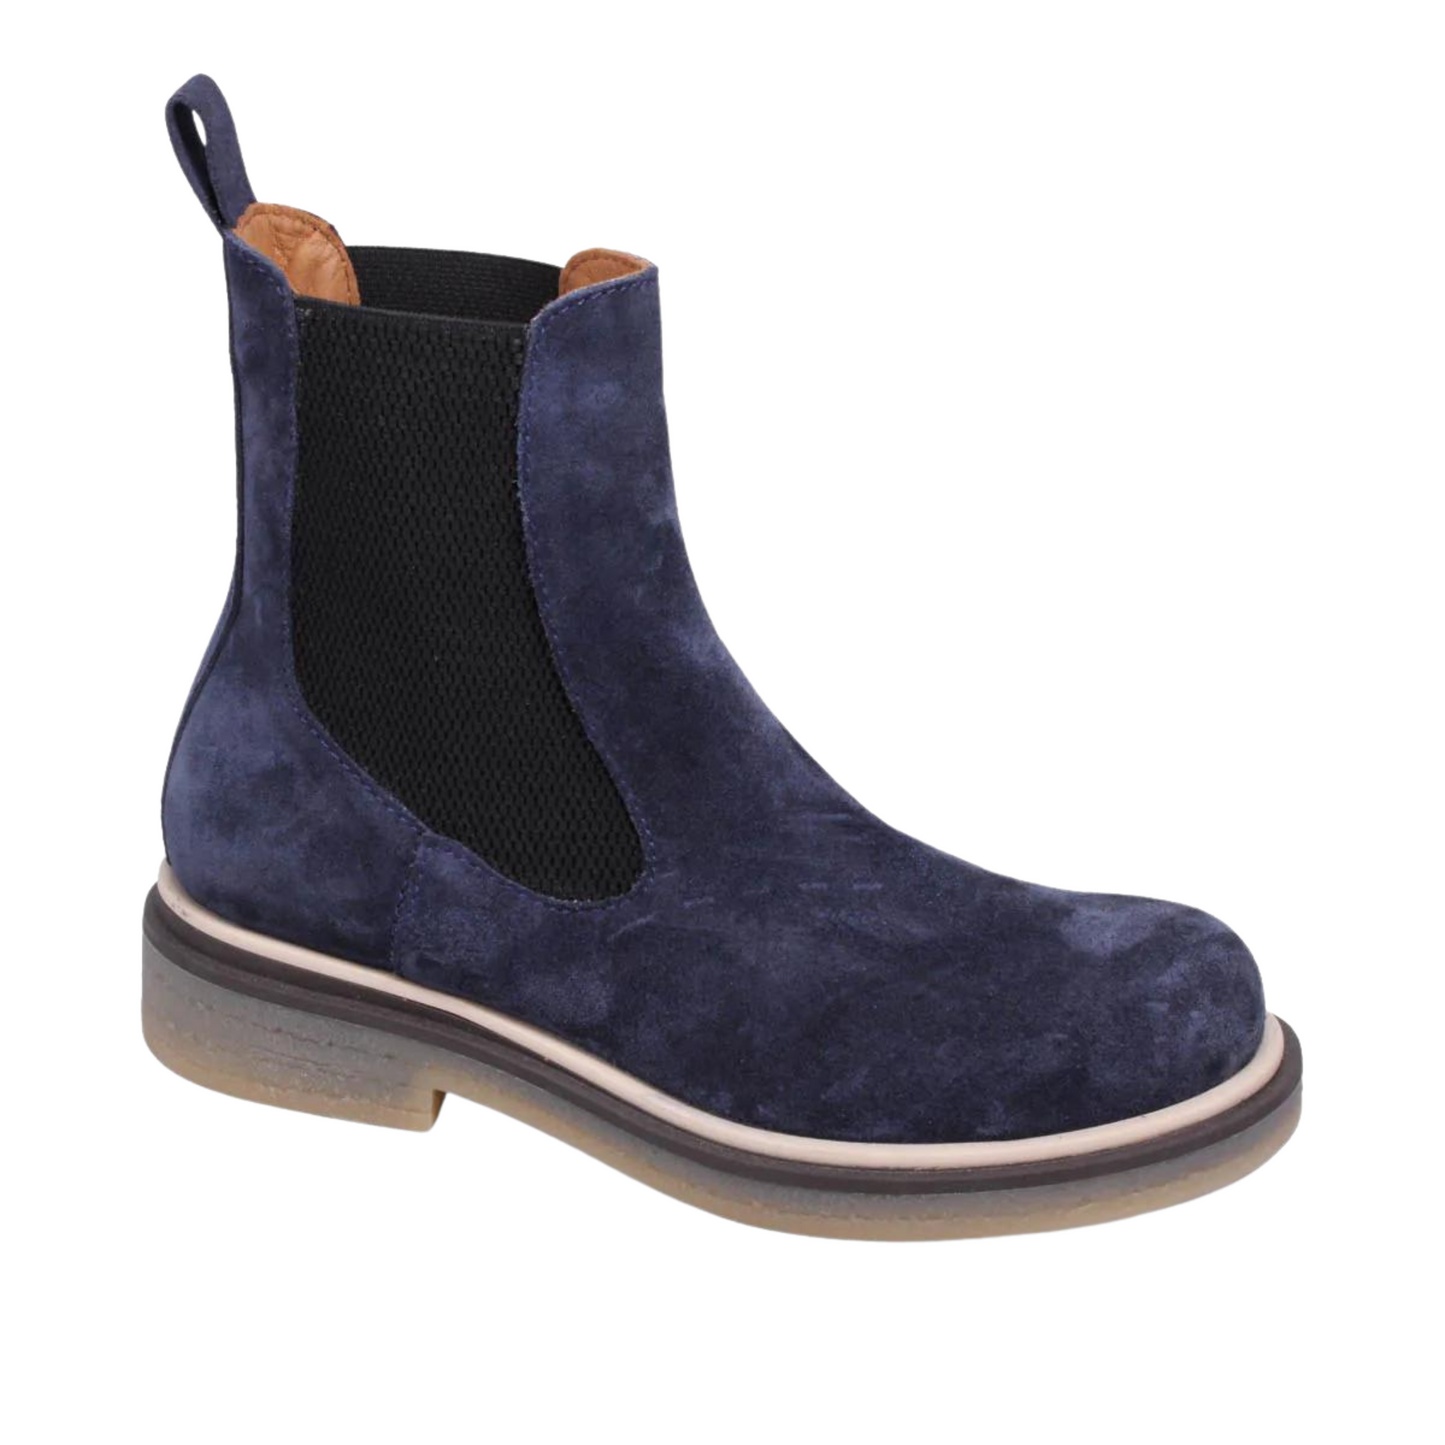 A right side view of a navy suede Chelsea boot.